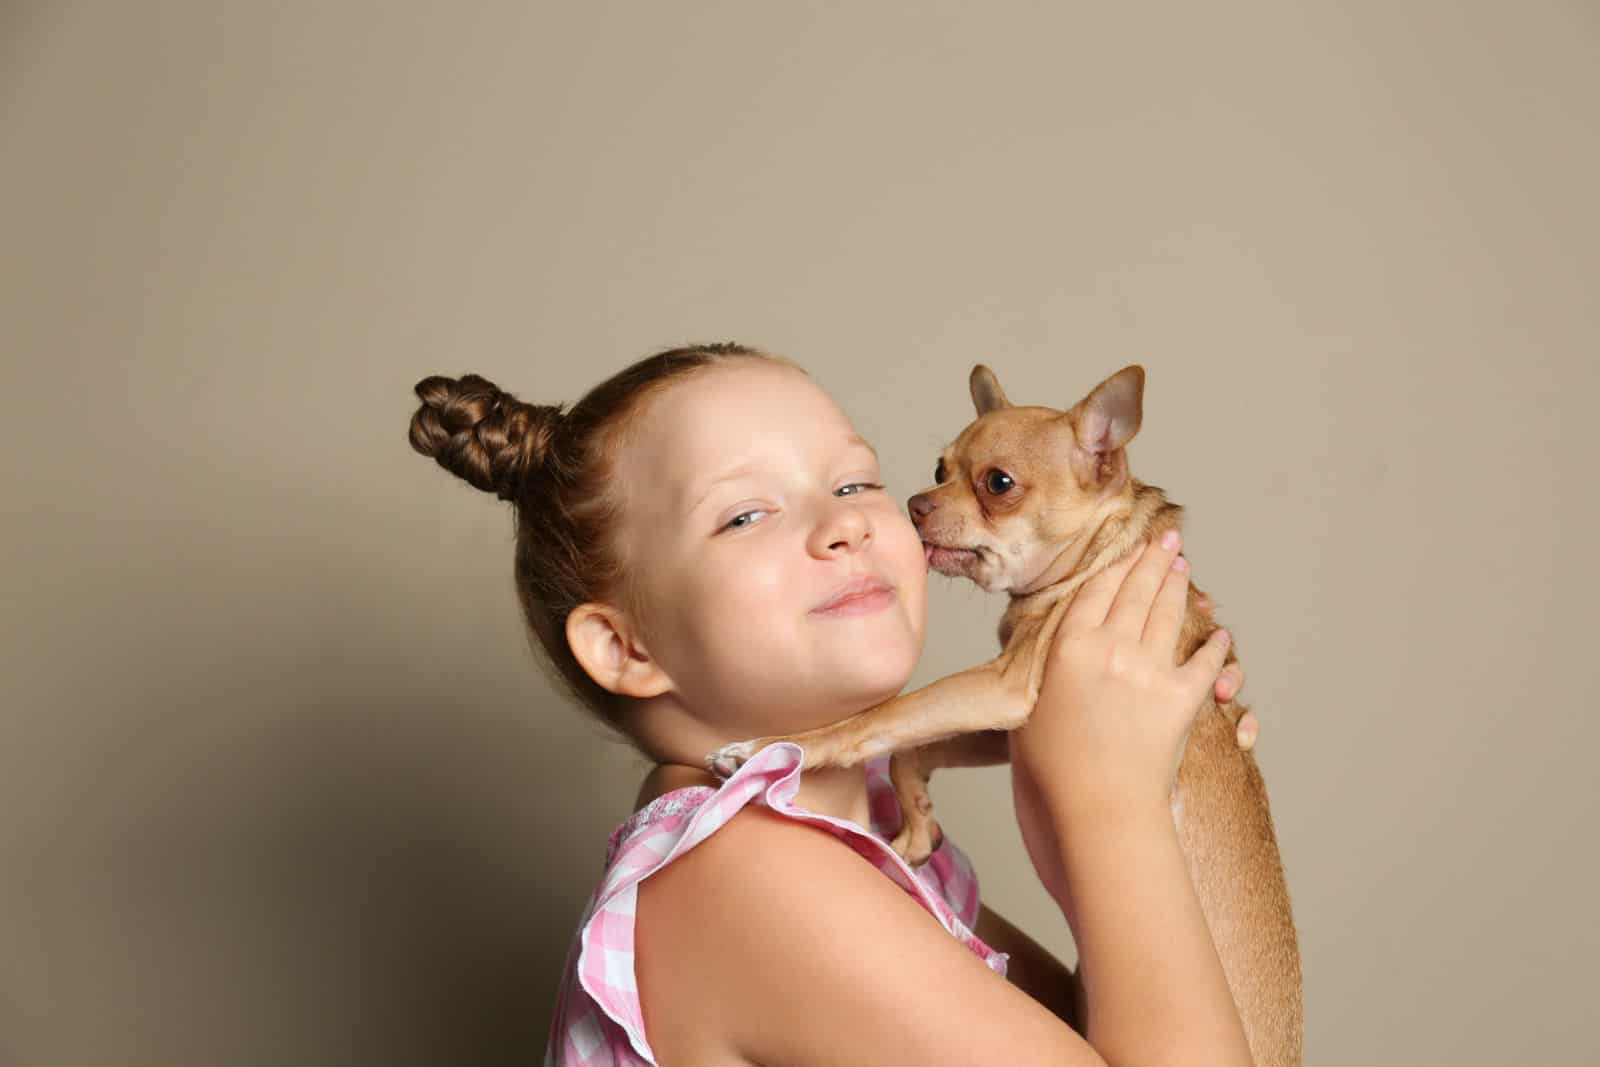 Little girl with her Chihuahua dog on grey background